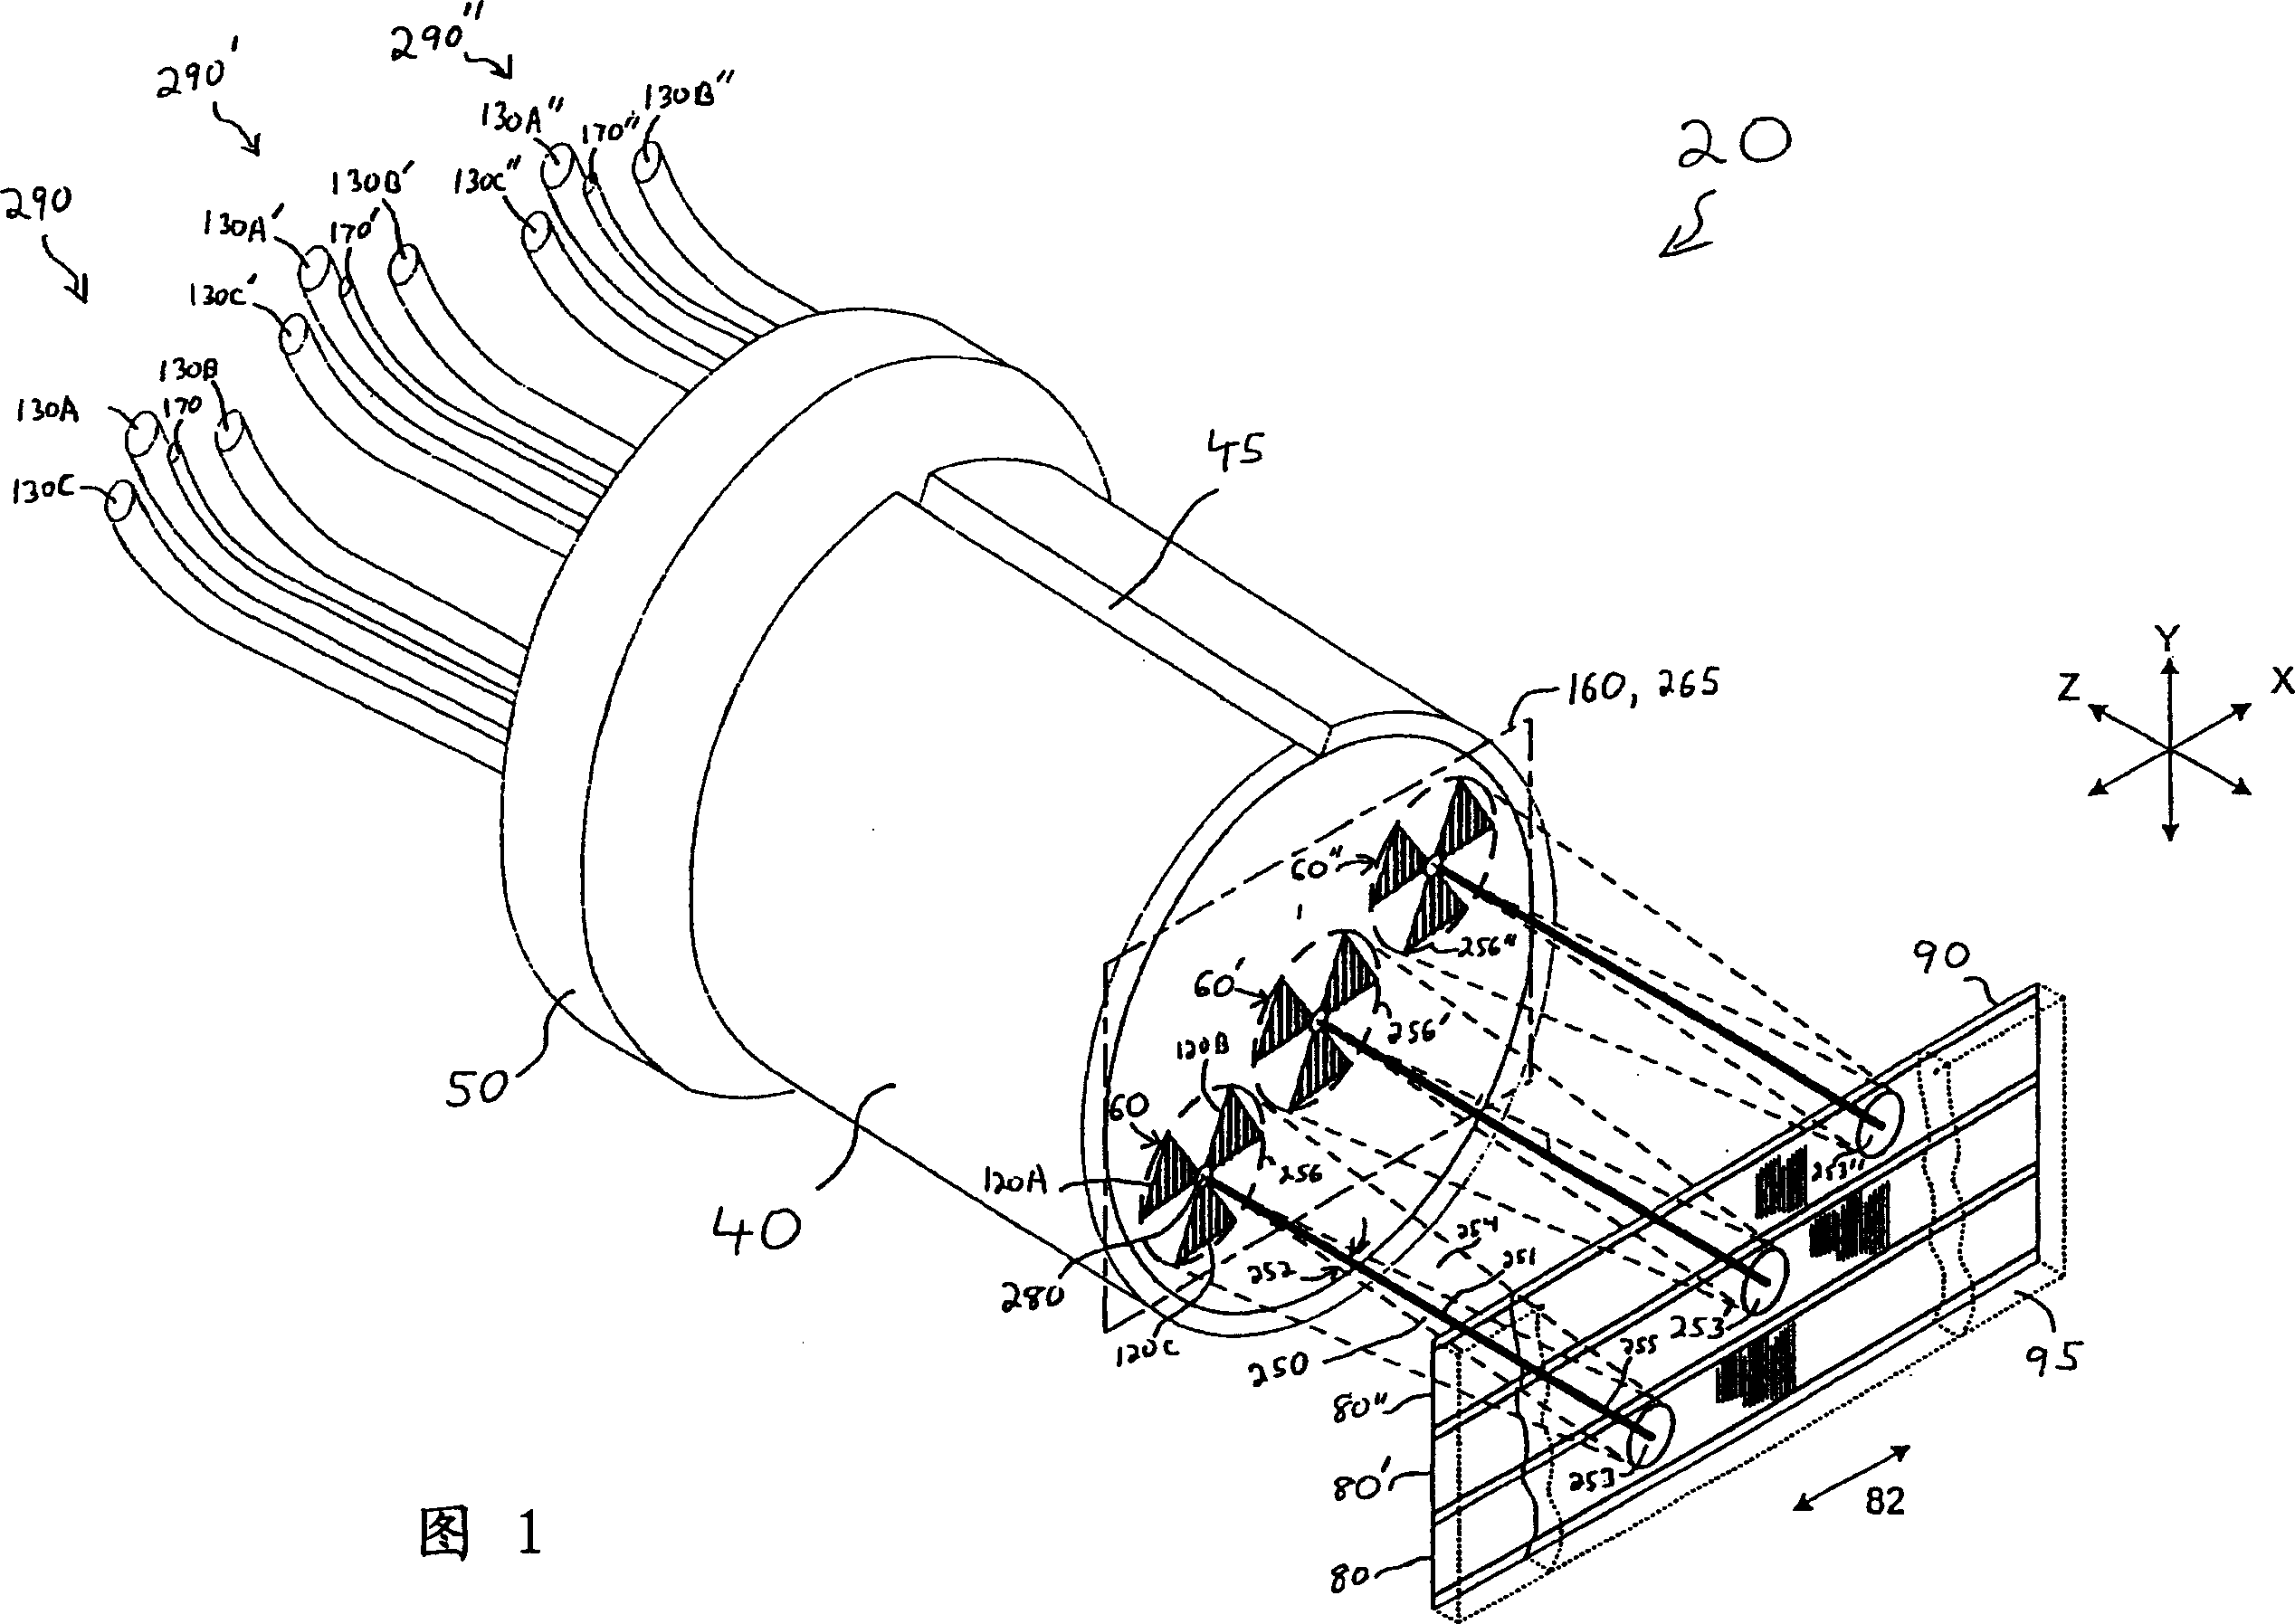 Absolute position miniature grating encoder readhead using fiber optic receiver channels